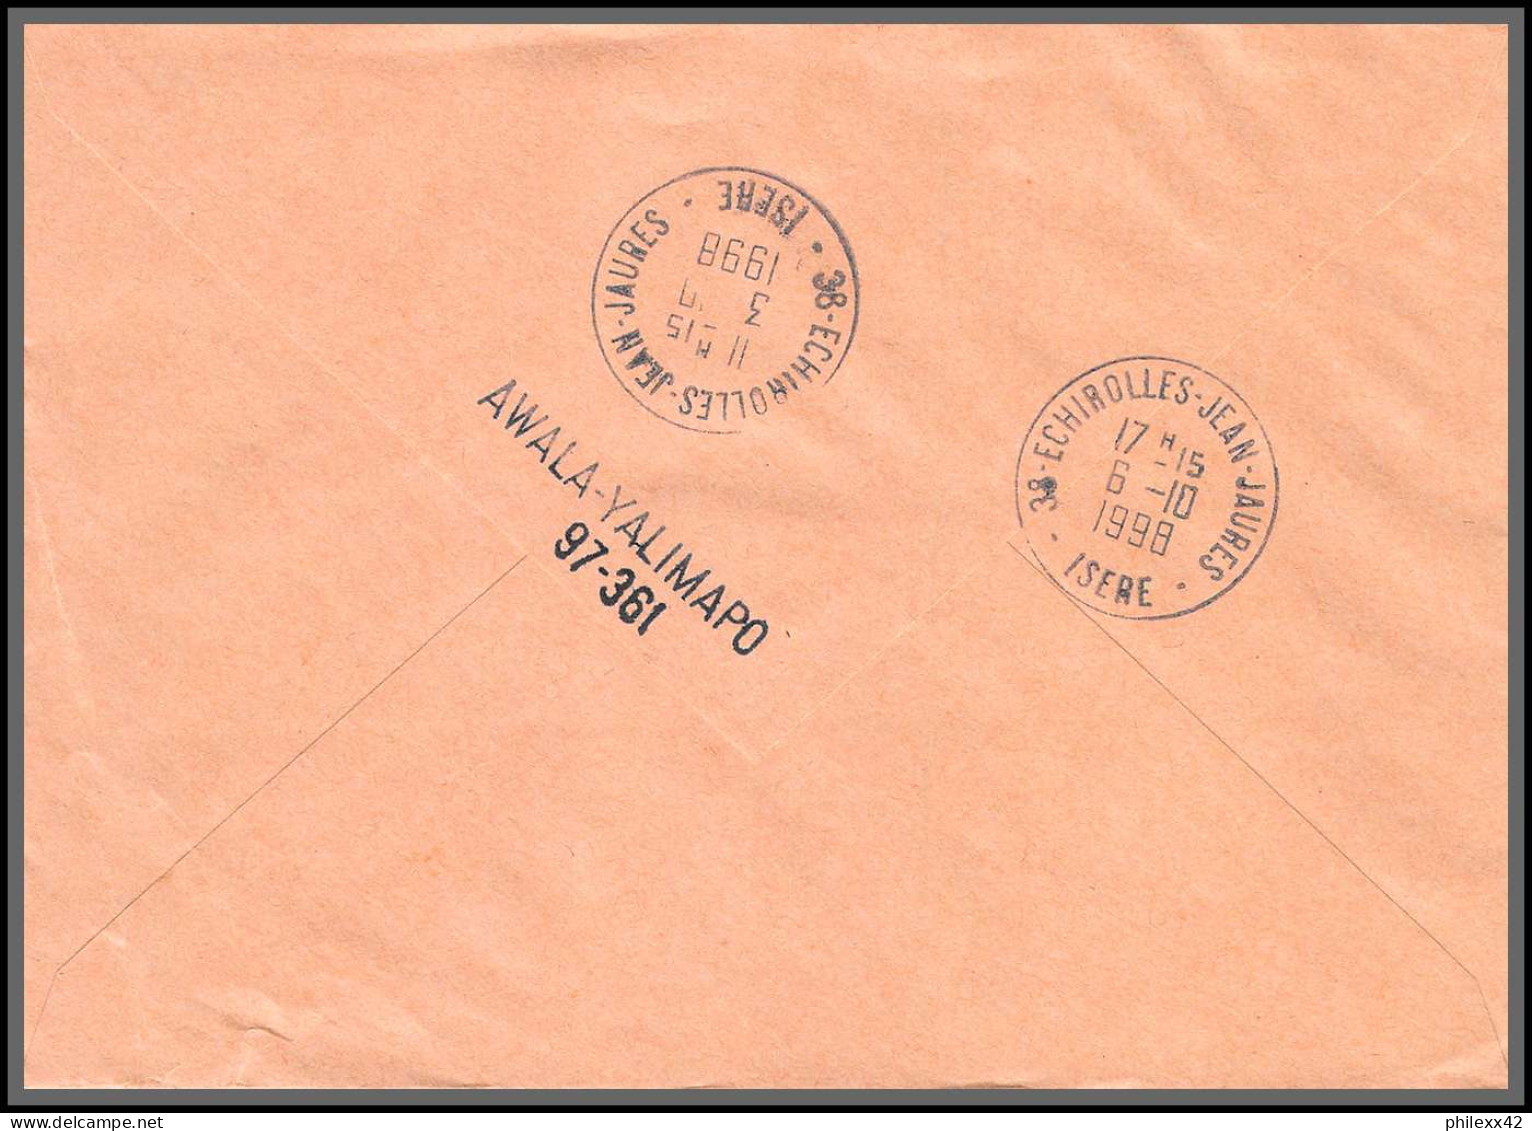 74460 Mixte Briat Luquet Mayotte St Pierre 26/9/1998 Awala-Yalimapo Griffe Guyane Echirolles Isère Lettre Cover Colonies - 1997-2004 Marianne Of July 14th